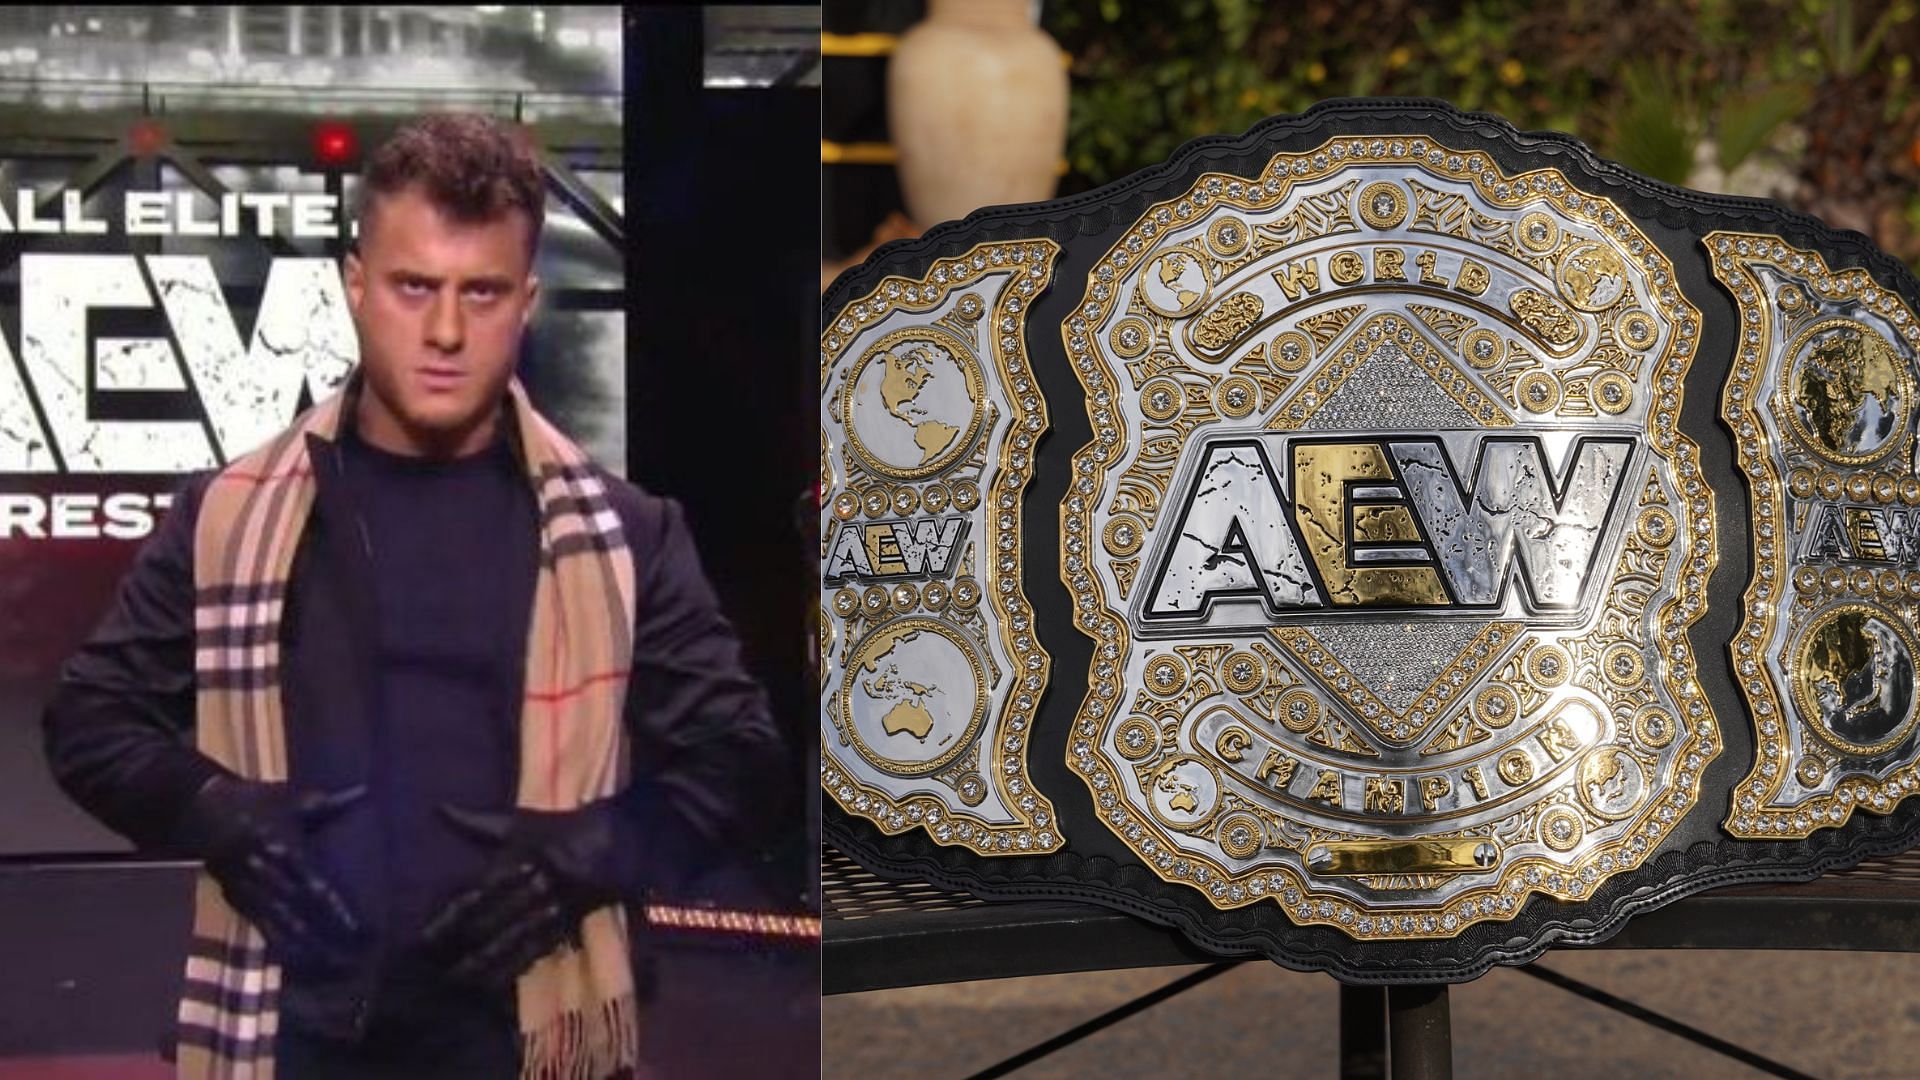 Could MJF win the AEW World Championship soon?